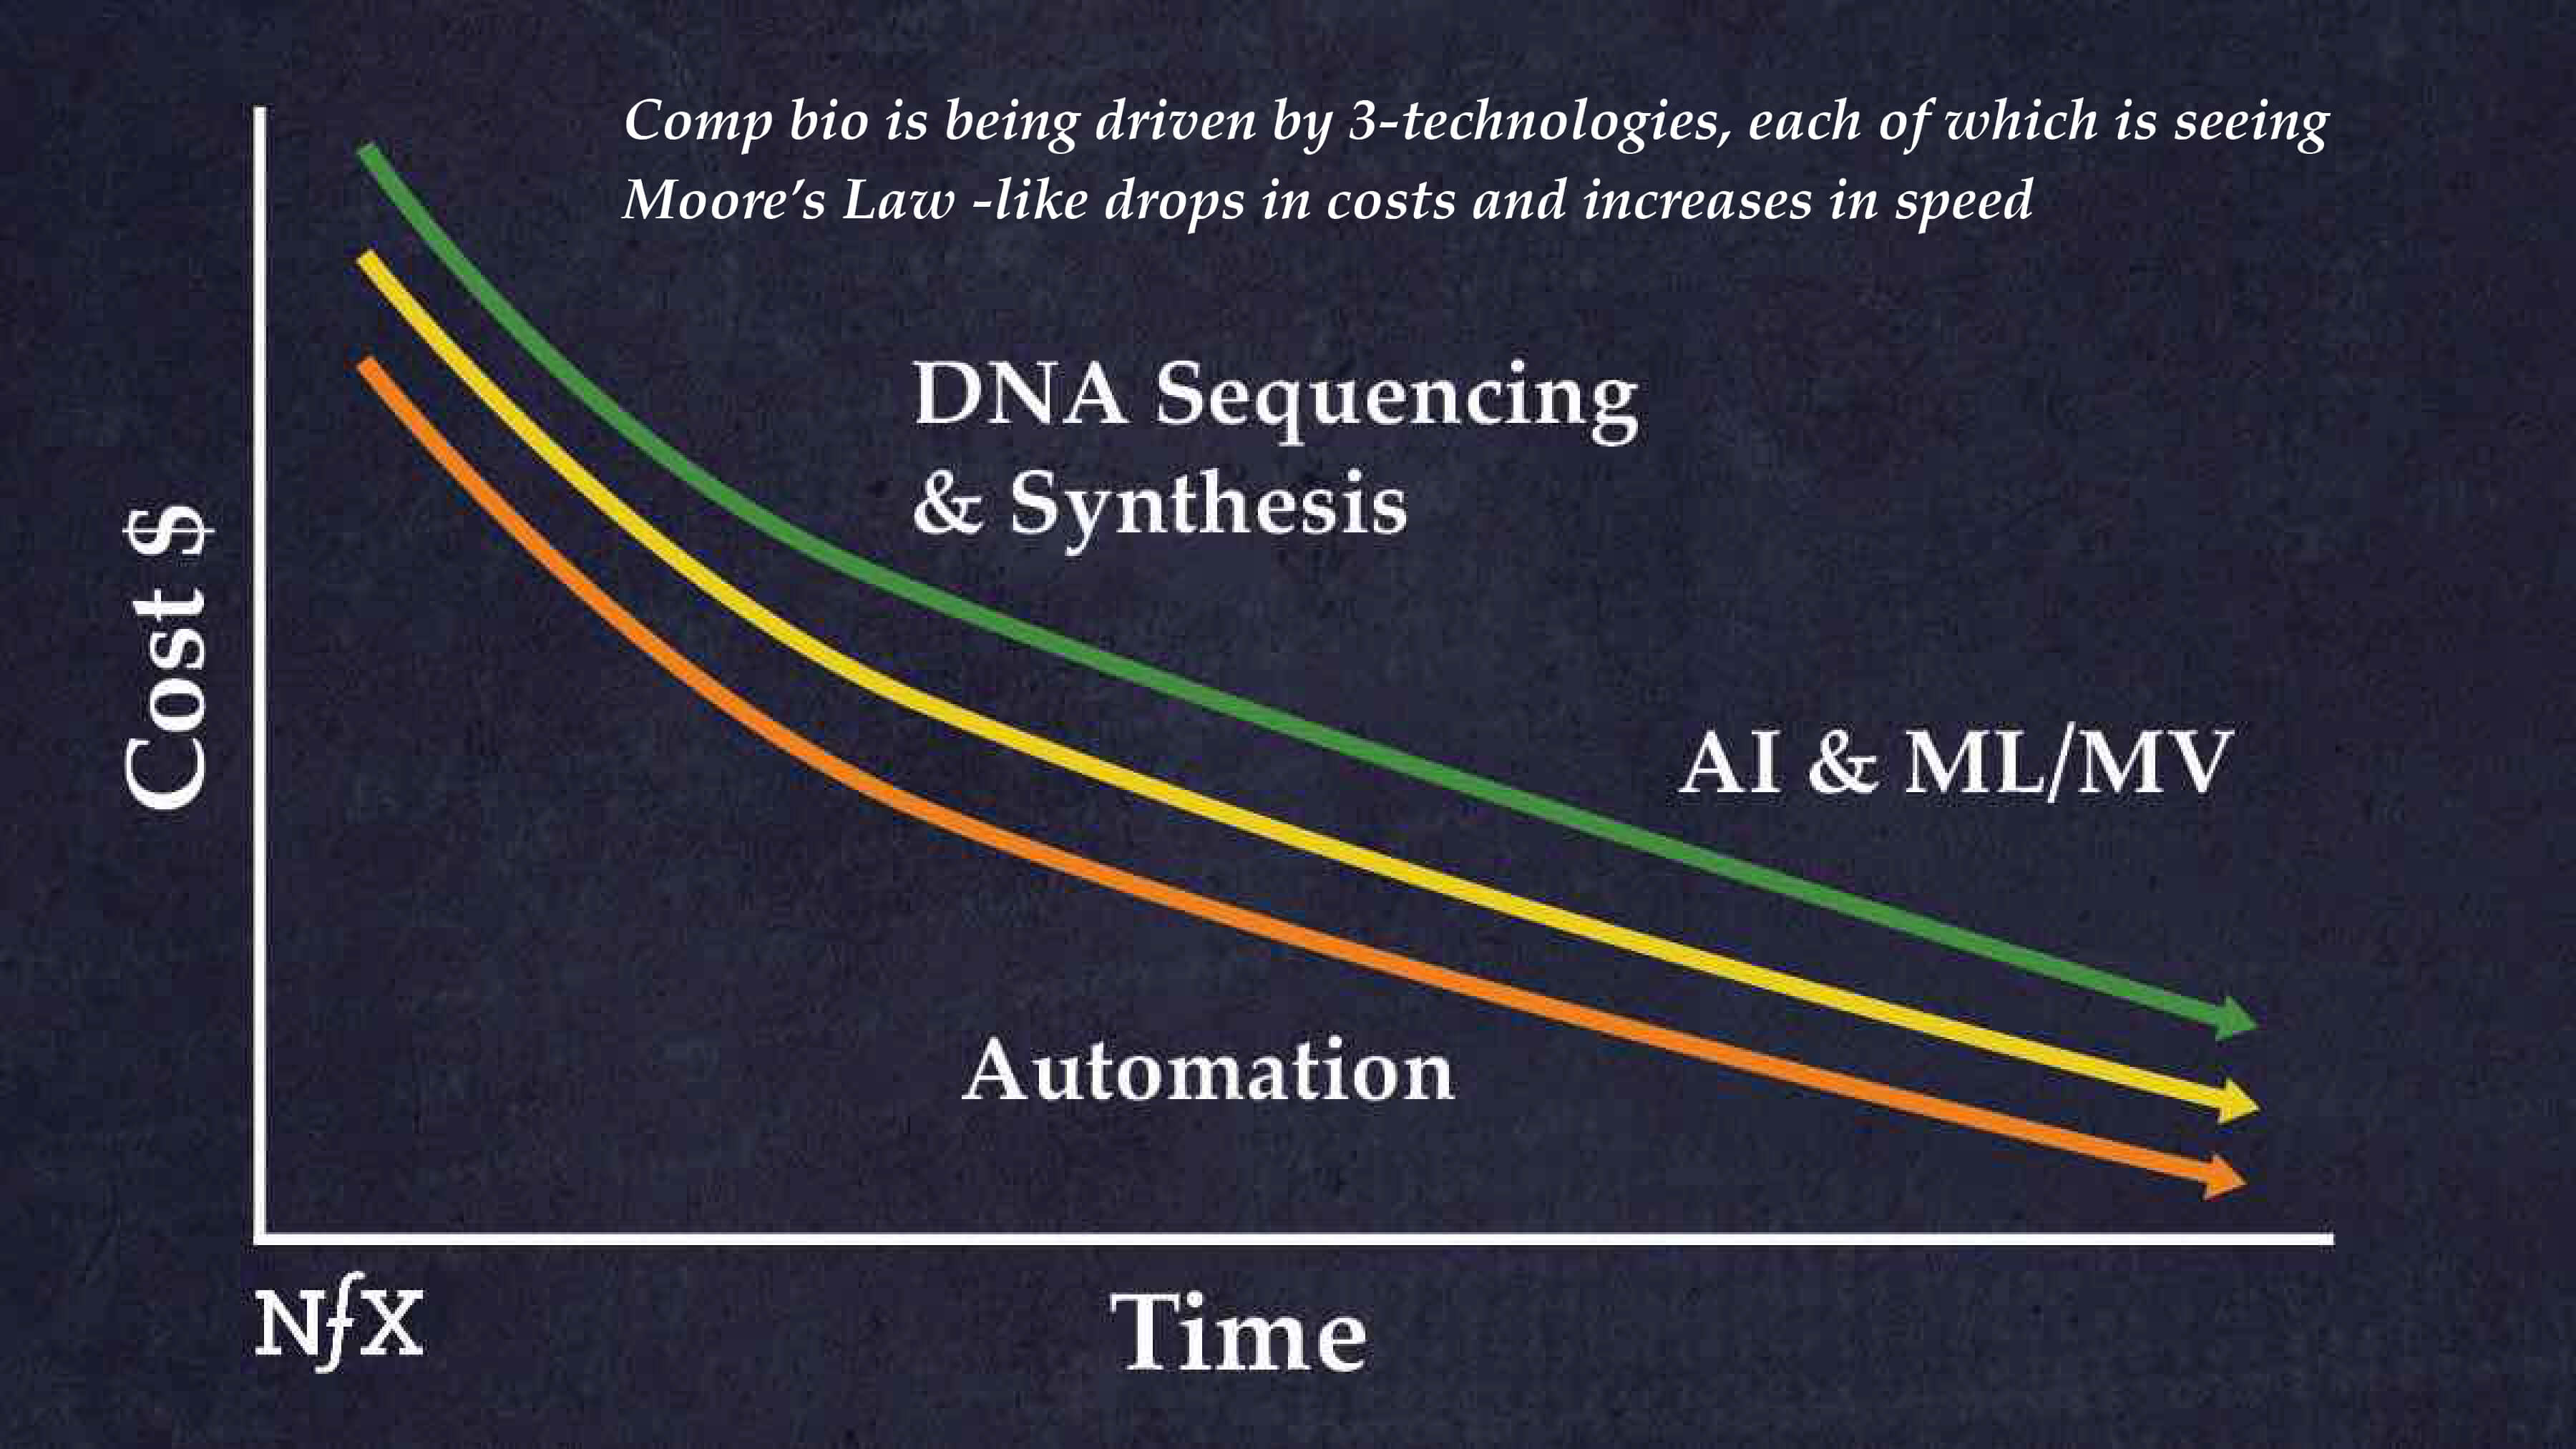 DNA Sequencing & Synthesis, AI, ML, MV, and Automation are all dropping like Moore's Law